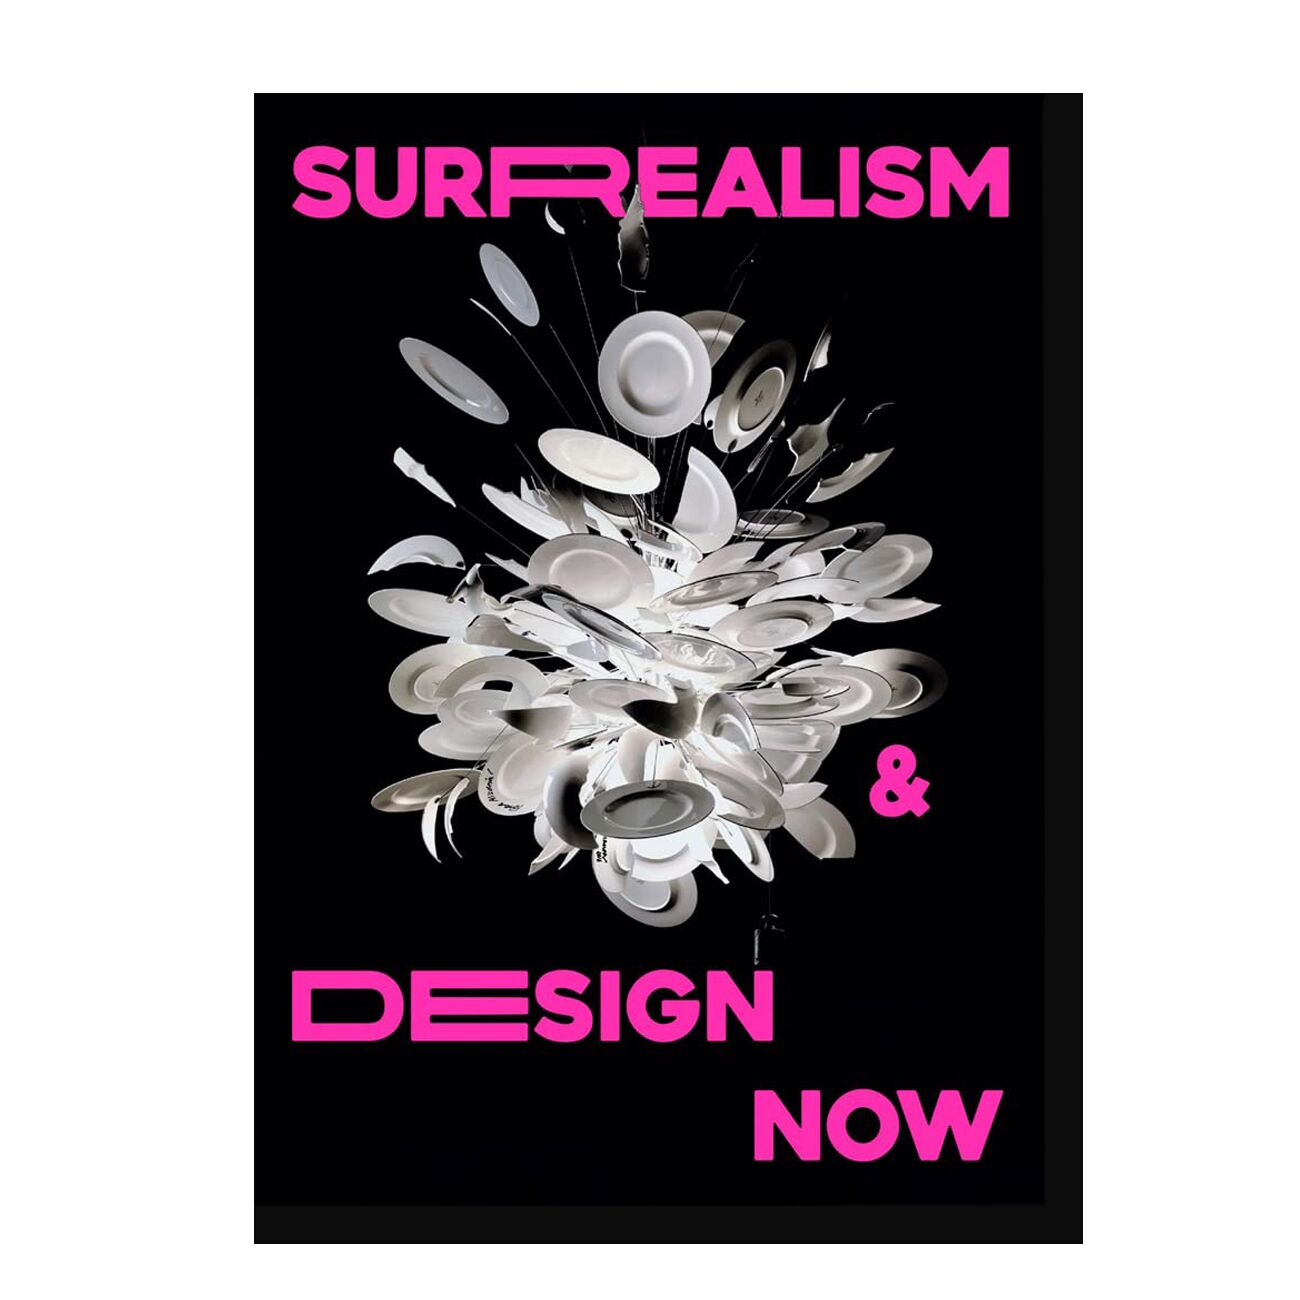 Surrealism and Design Now